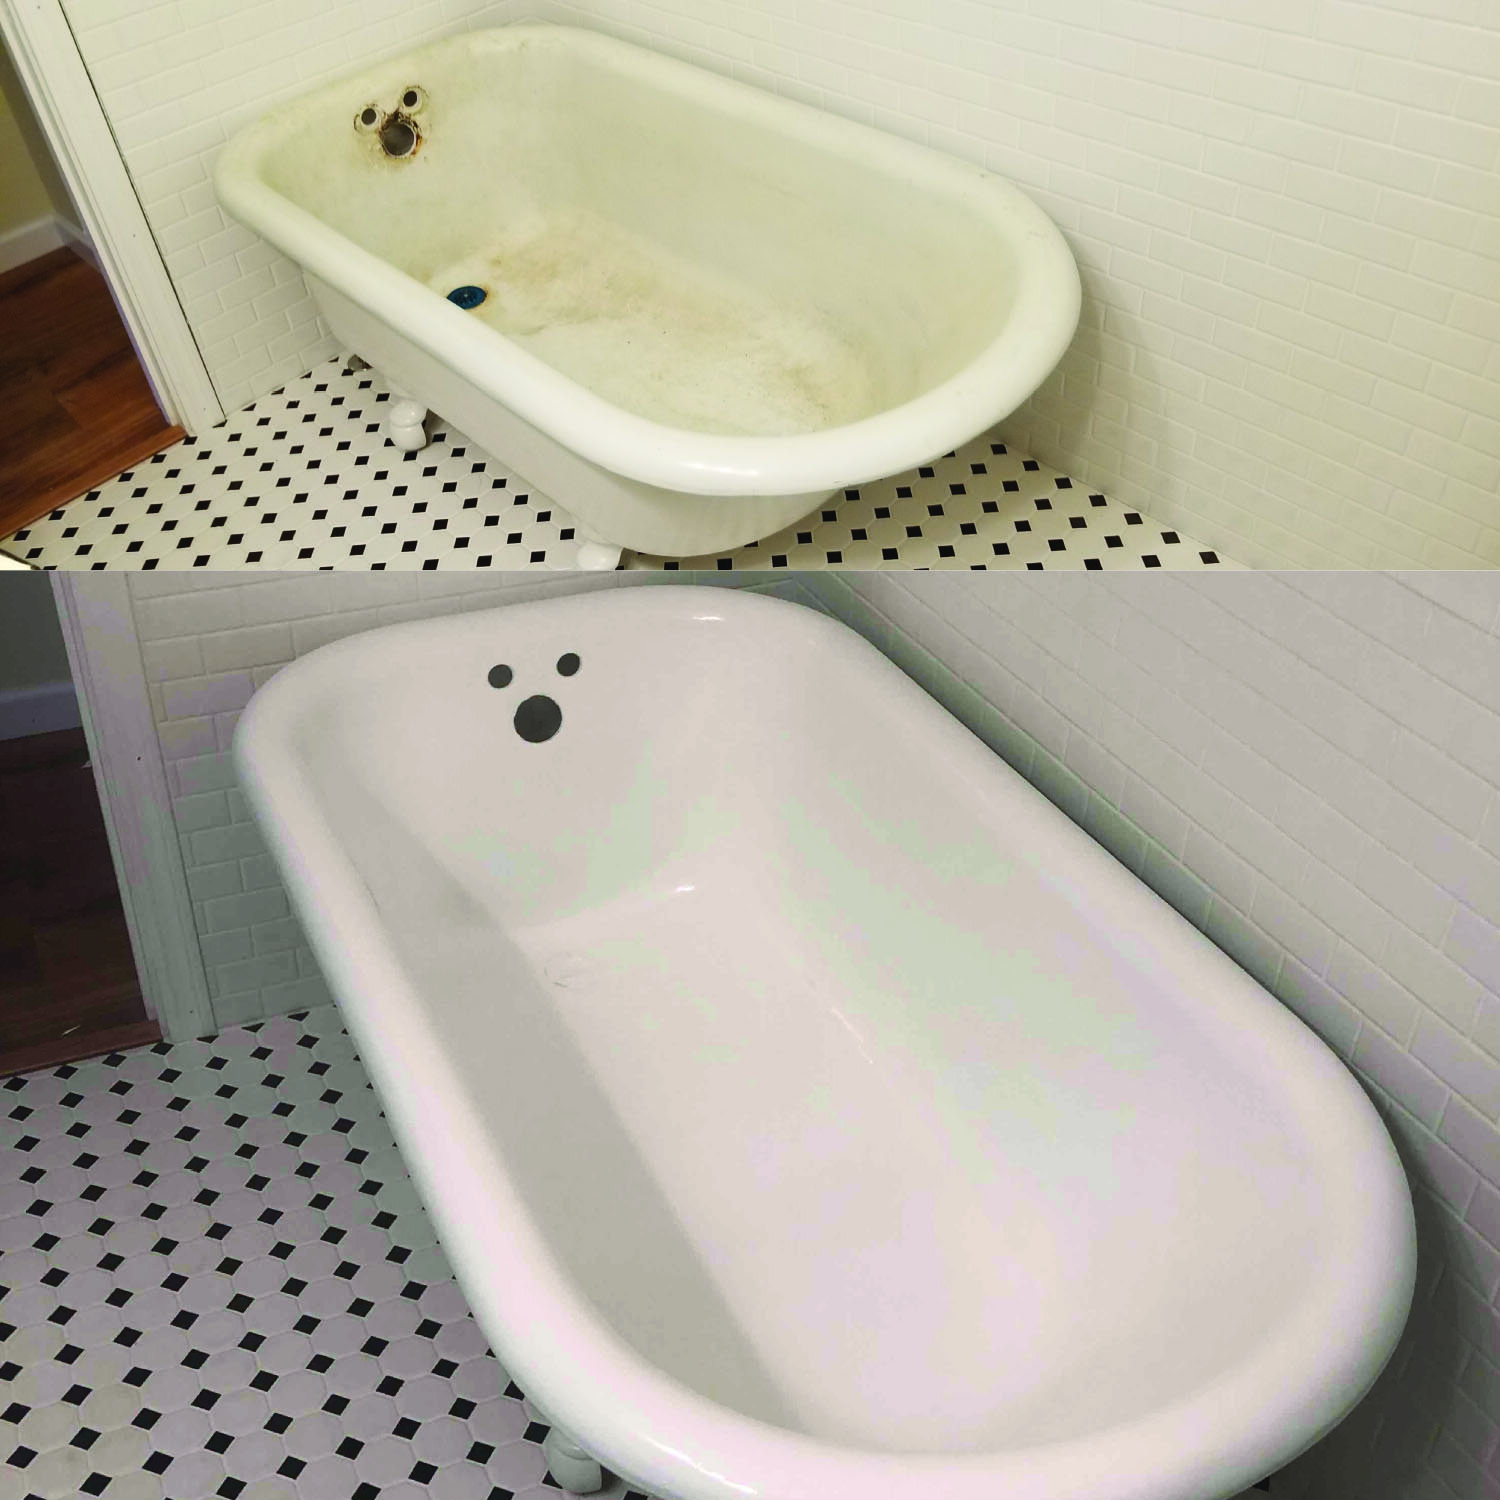   Old claw foot tubs look amazing with some minor repair of rust damages and chips and a little resurfacing.  